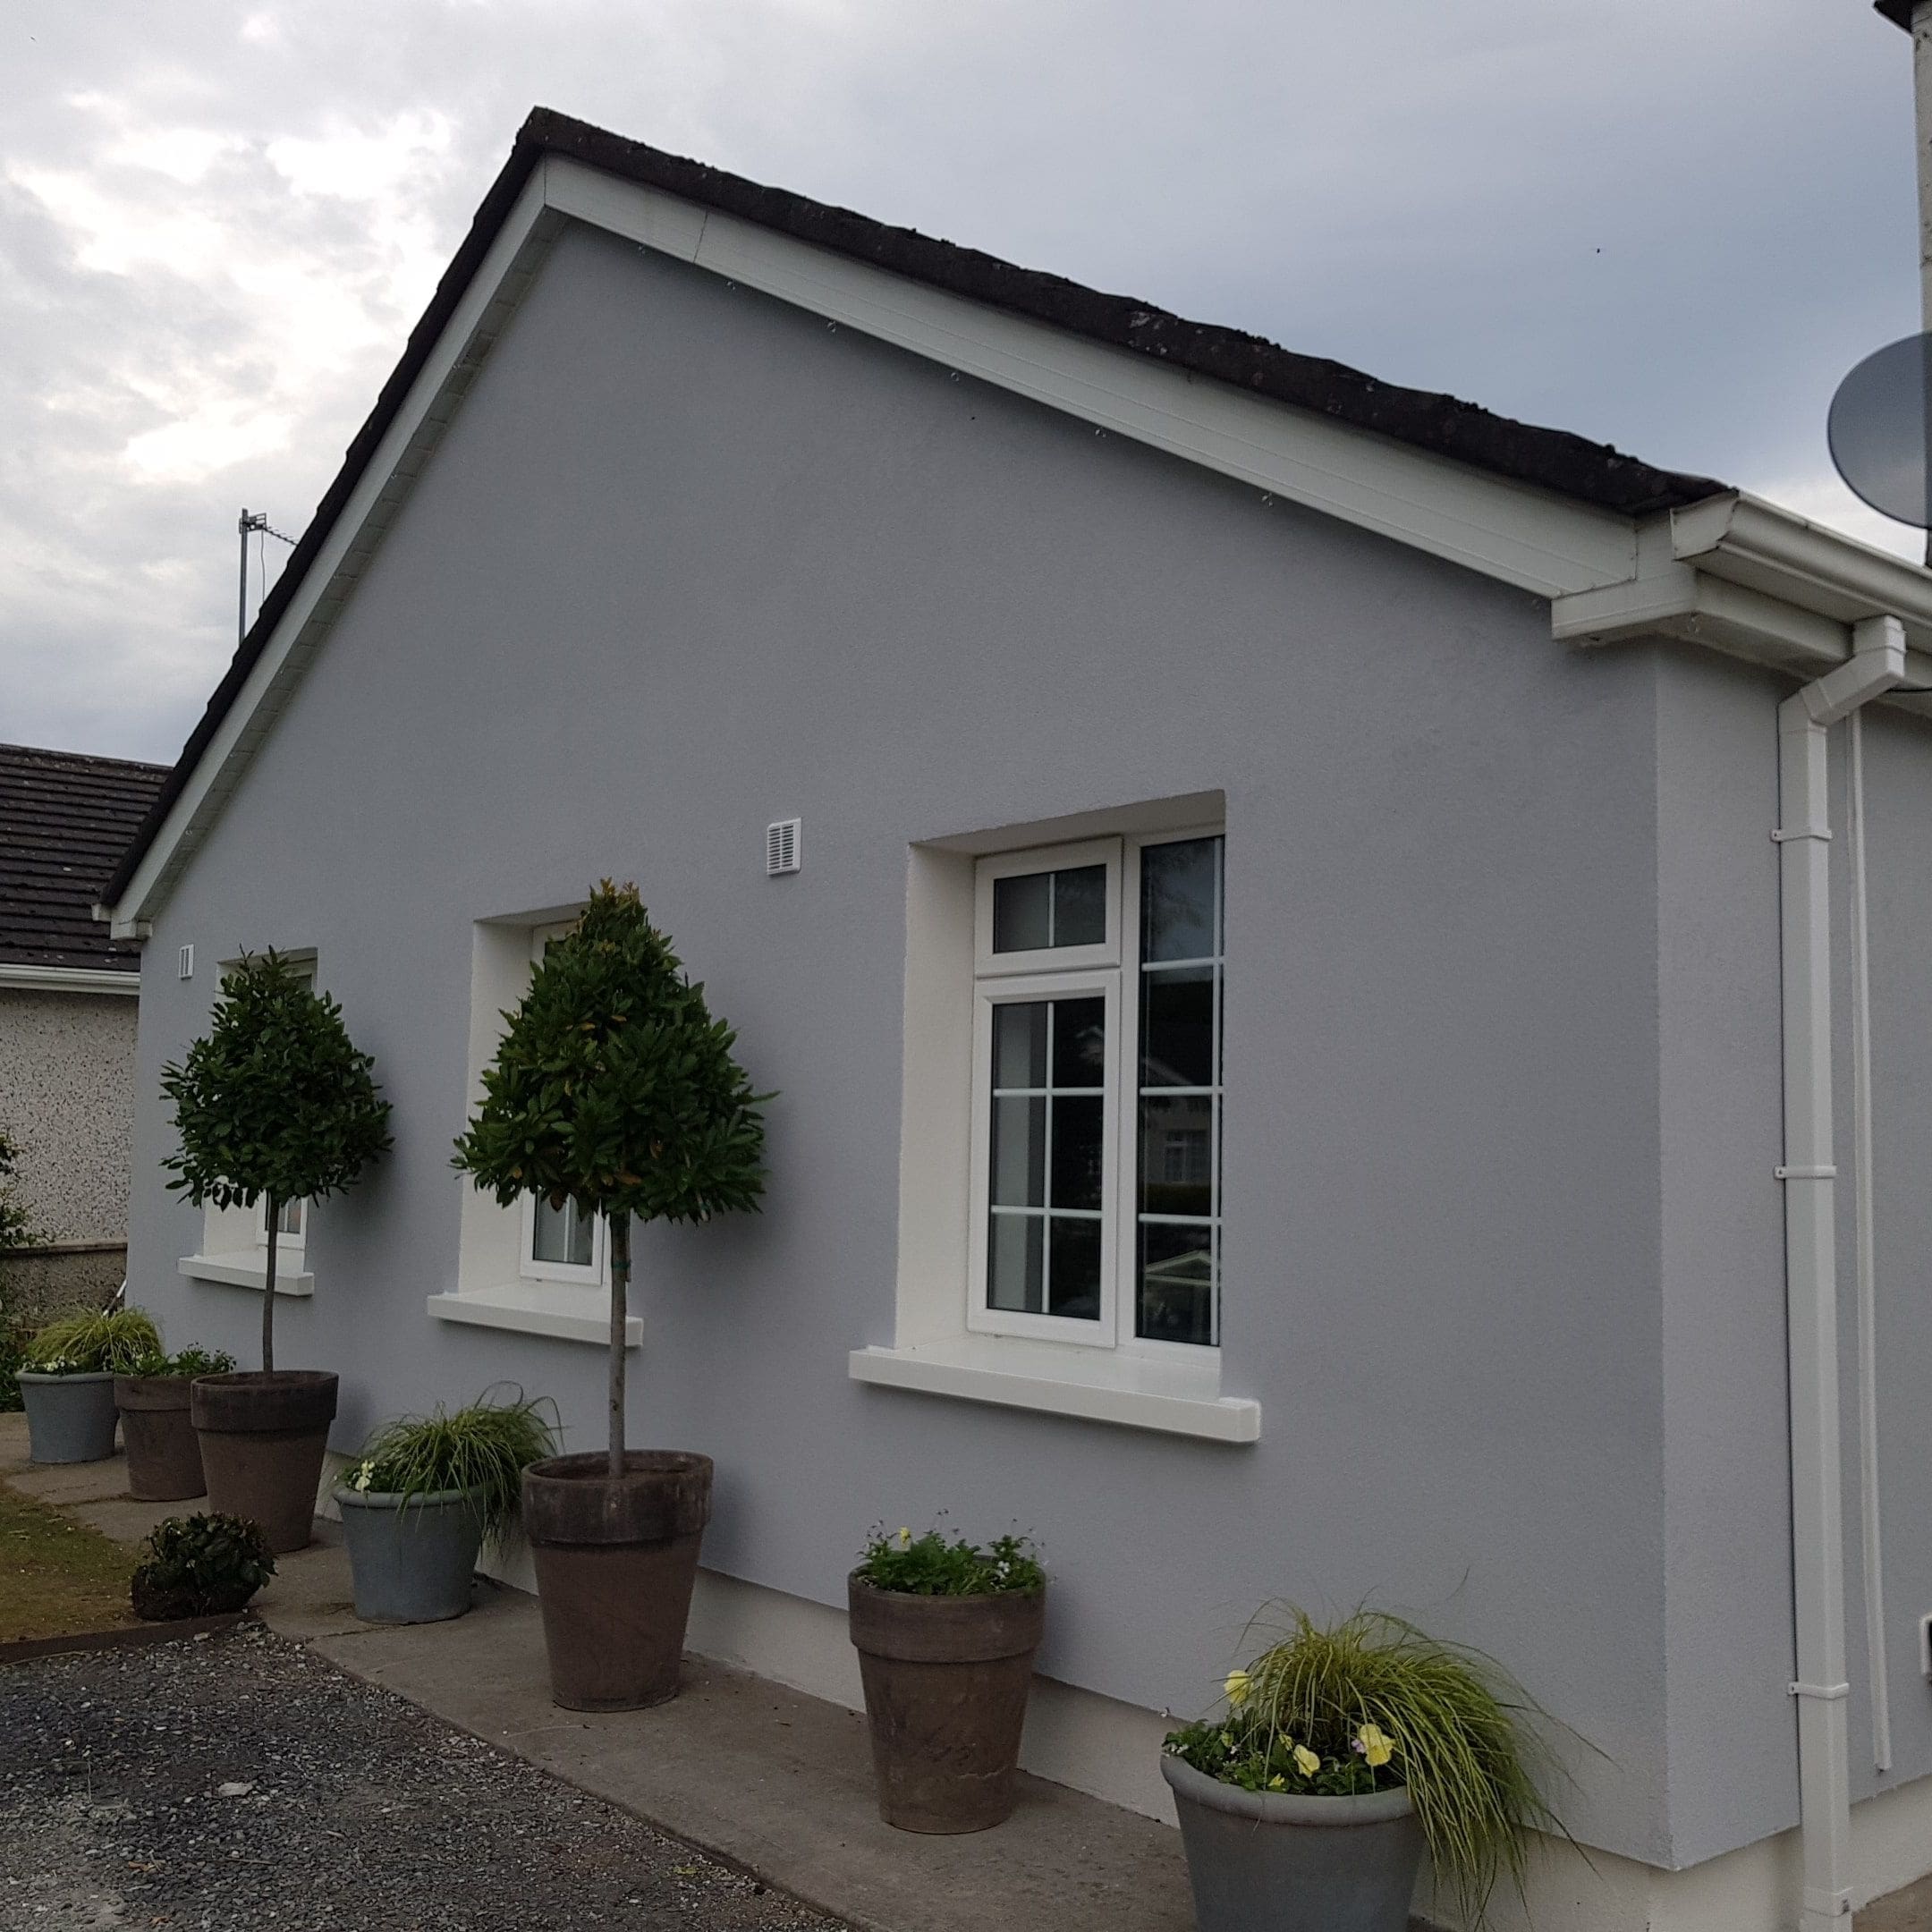 Project: Warmer Homes, Co. Westmeath